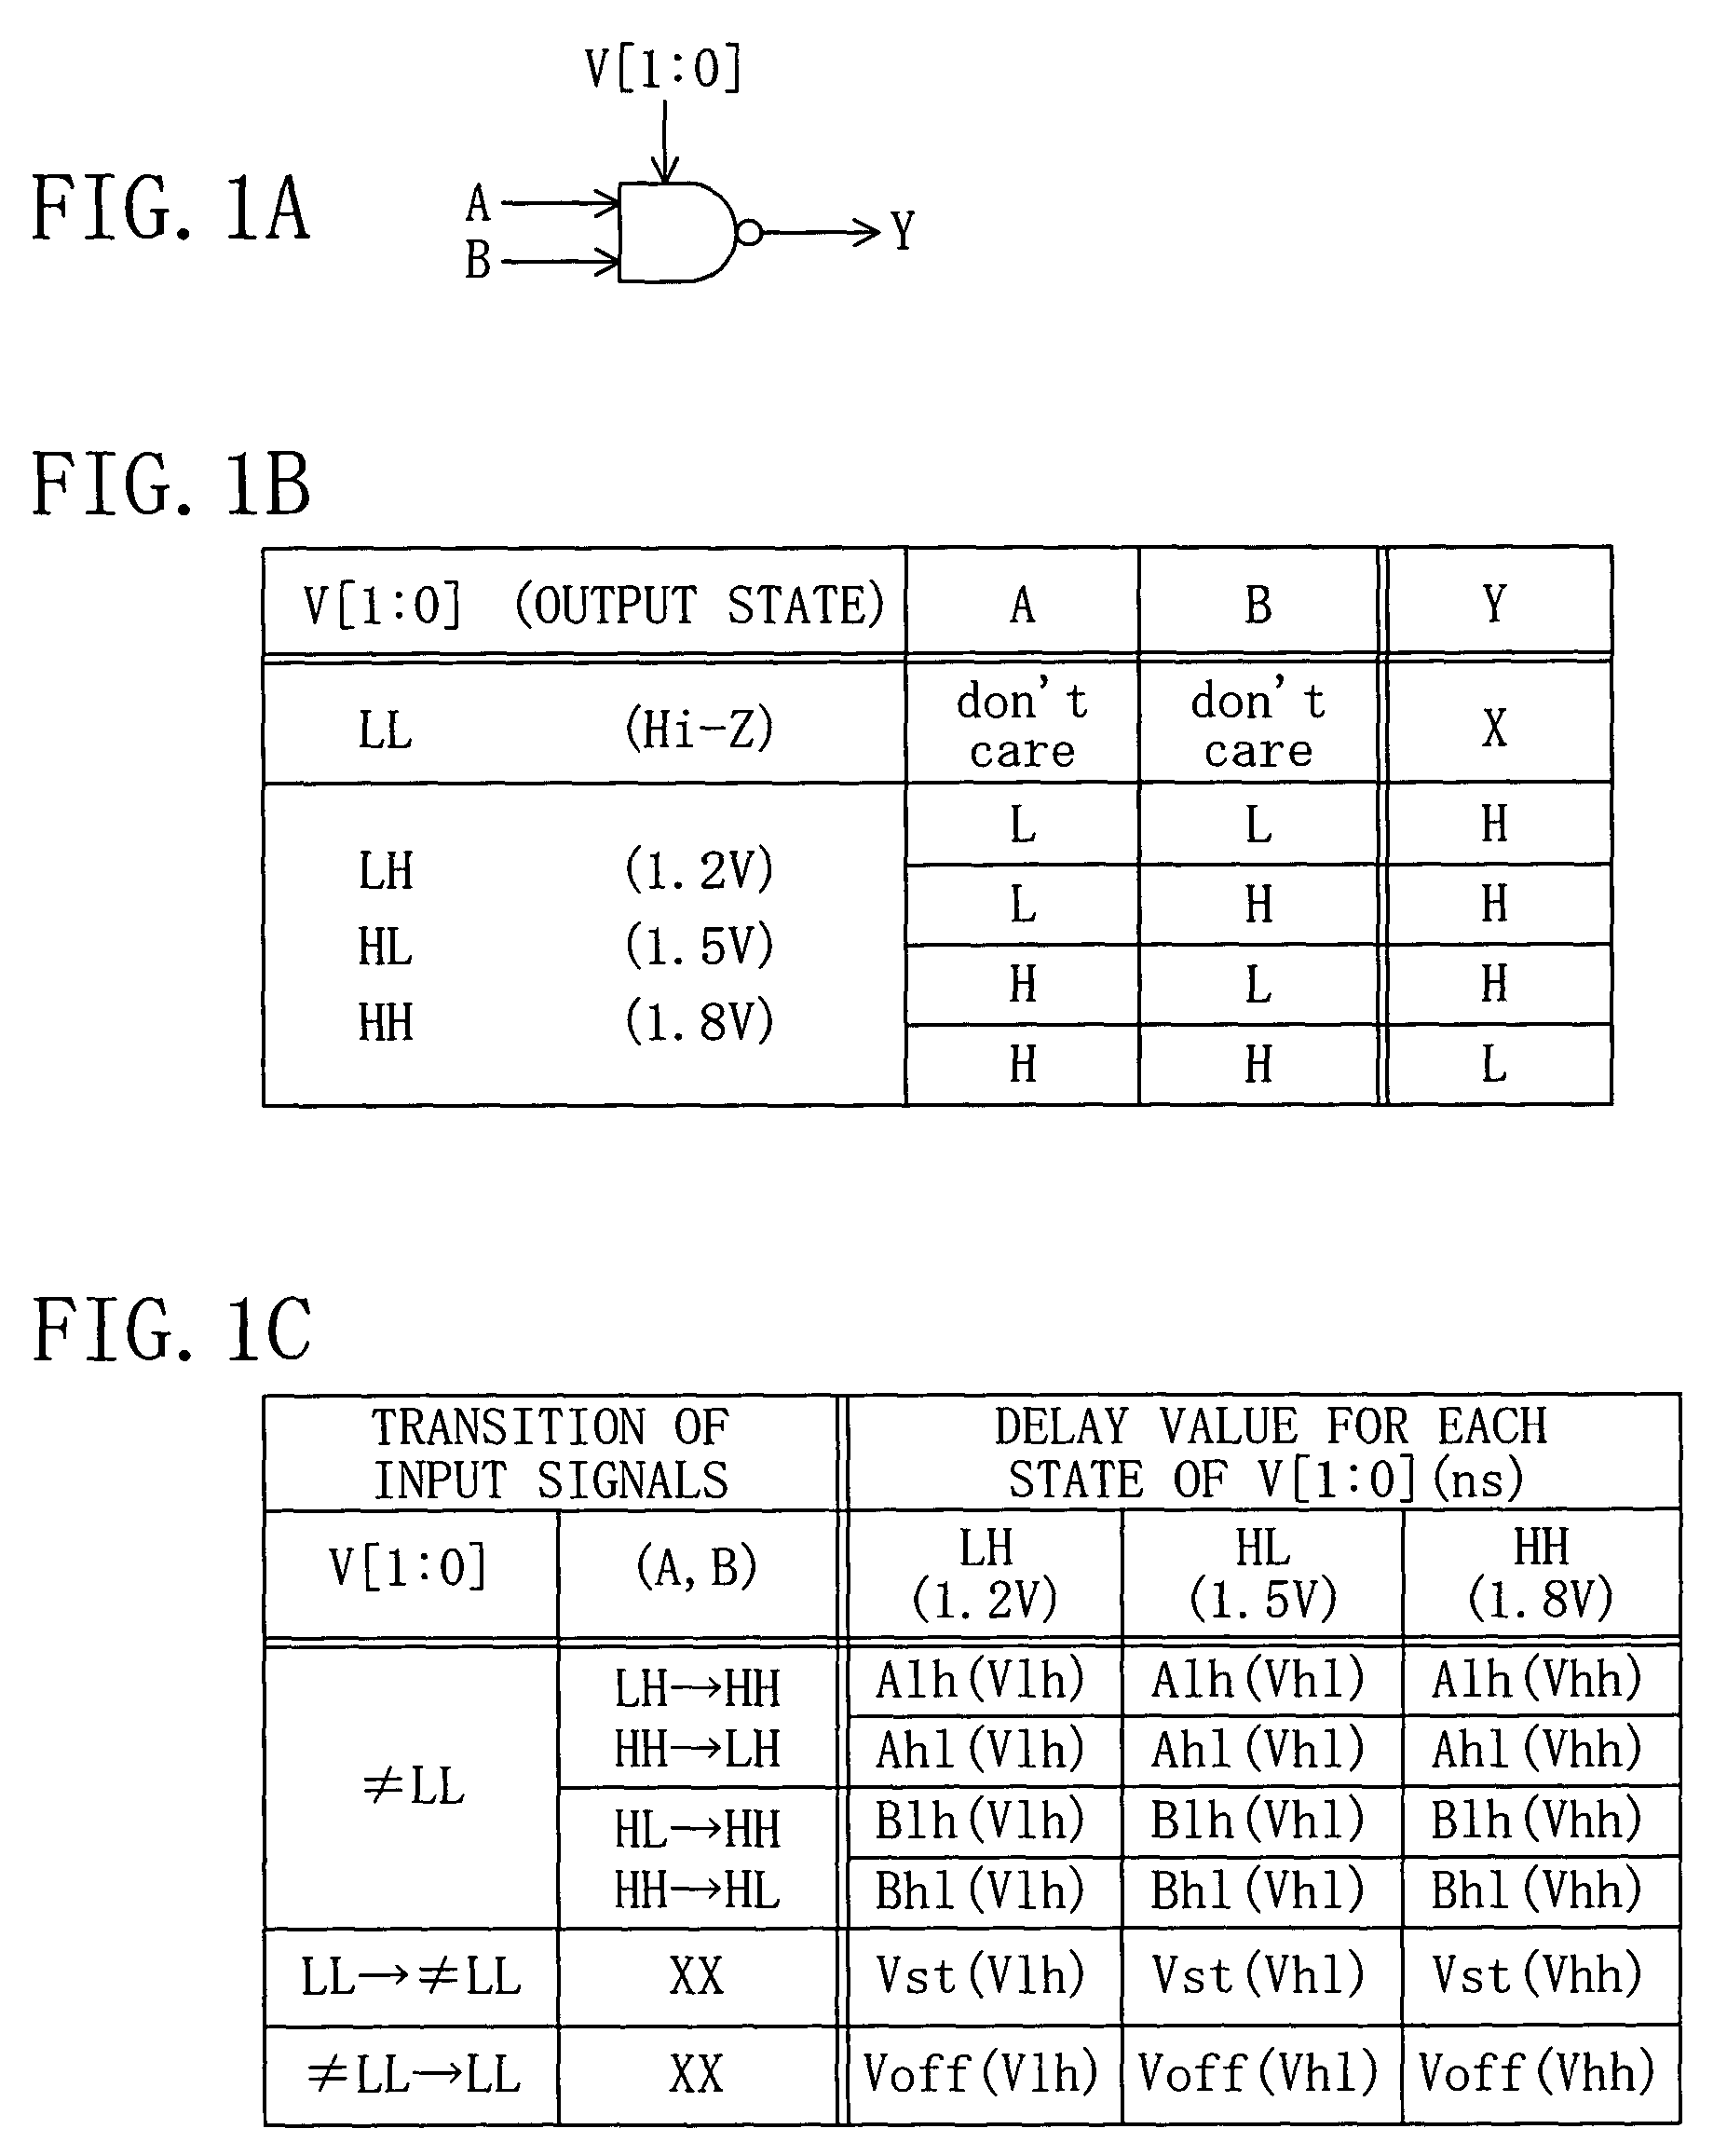 Cell library database and timing verification and withstand voltage verification systems for integrated circuit using the same